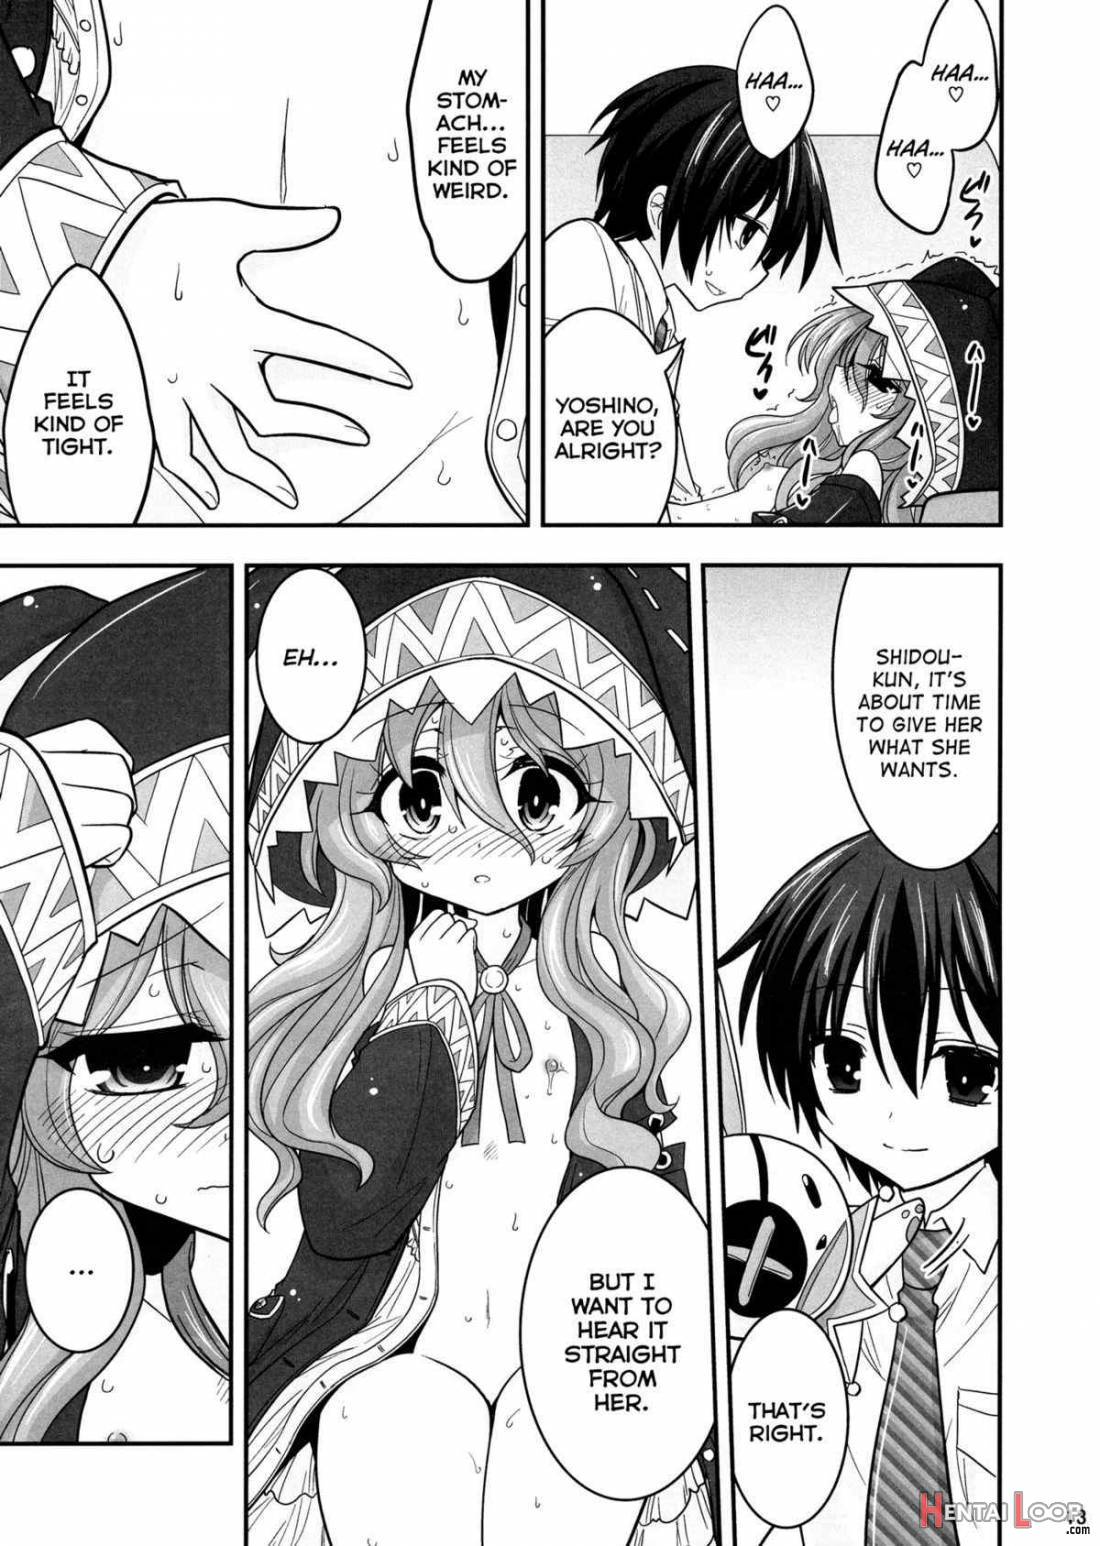 Yoshino Date After page 12